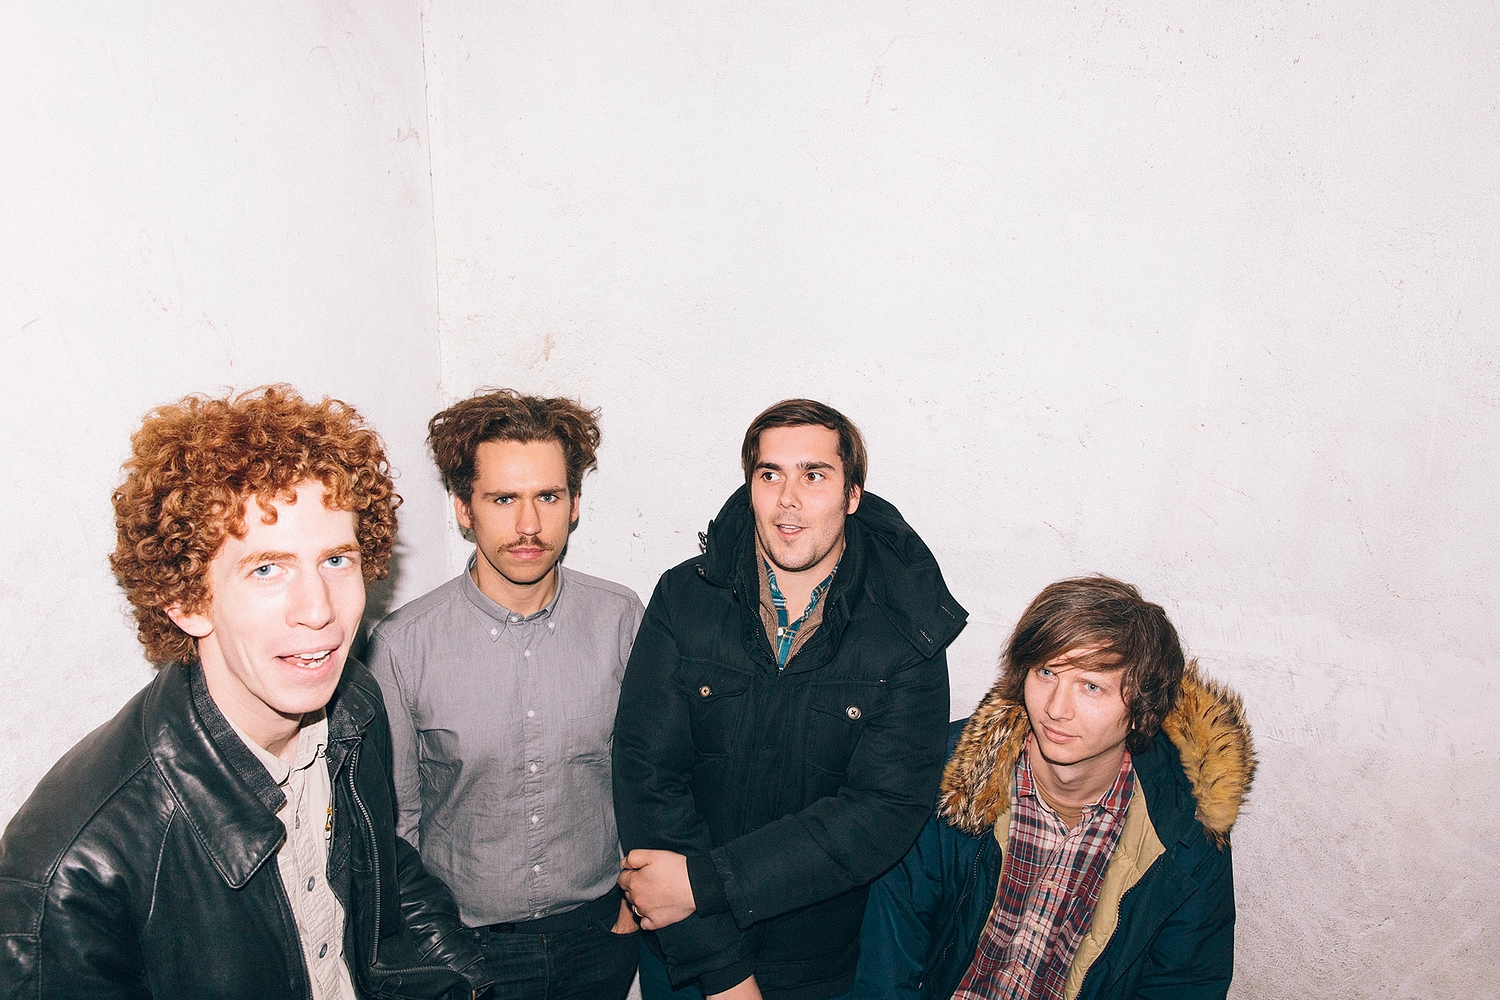 Parquet Courts unveil new track, ‘This Is Happening Now’